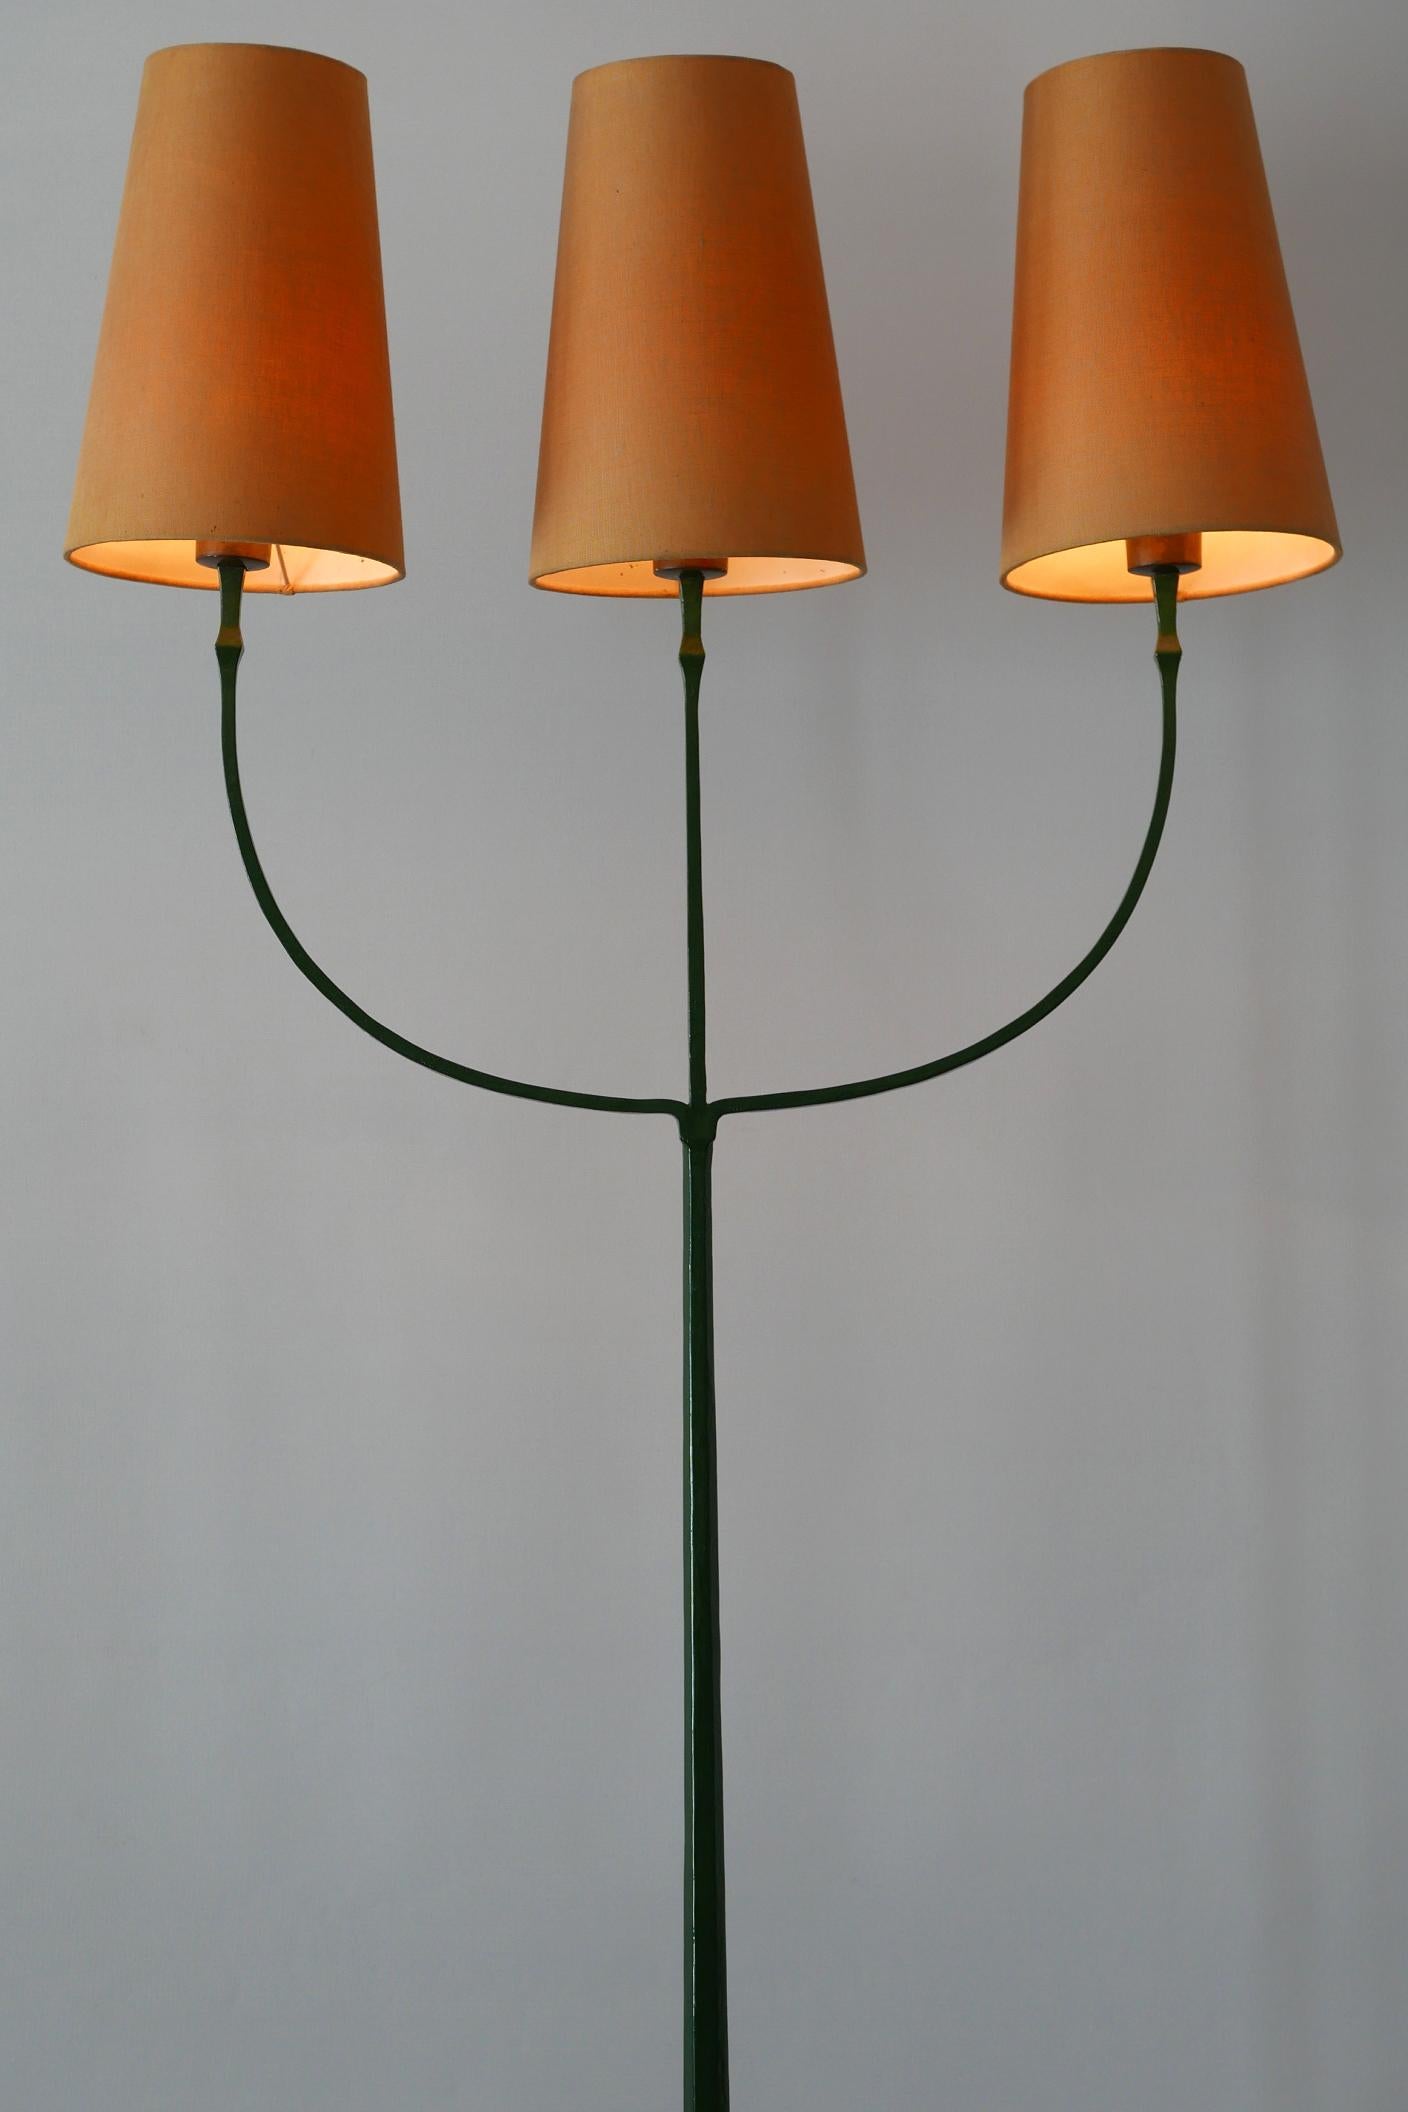 Painted Exceptional Mid-Century Modern Three Flamed Floor Lamp, 1950s For Sale